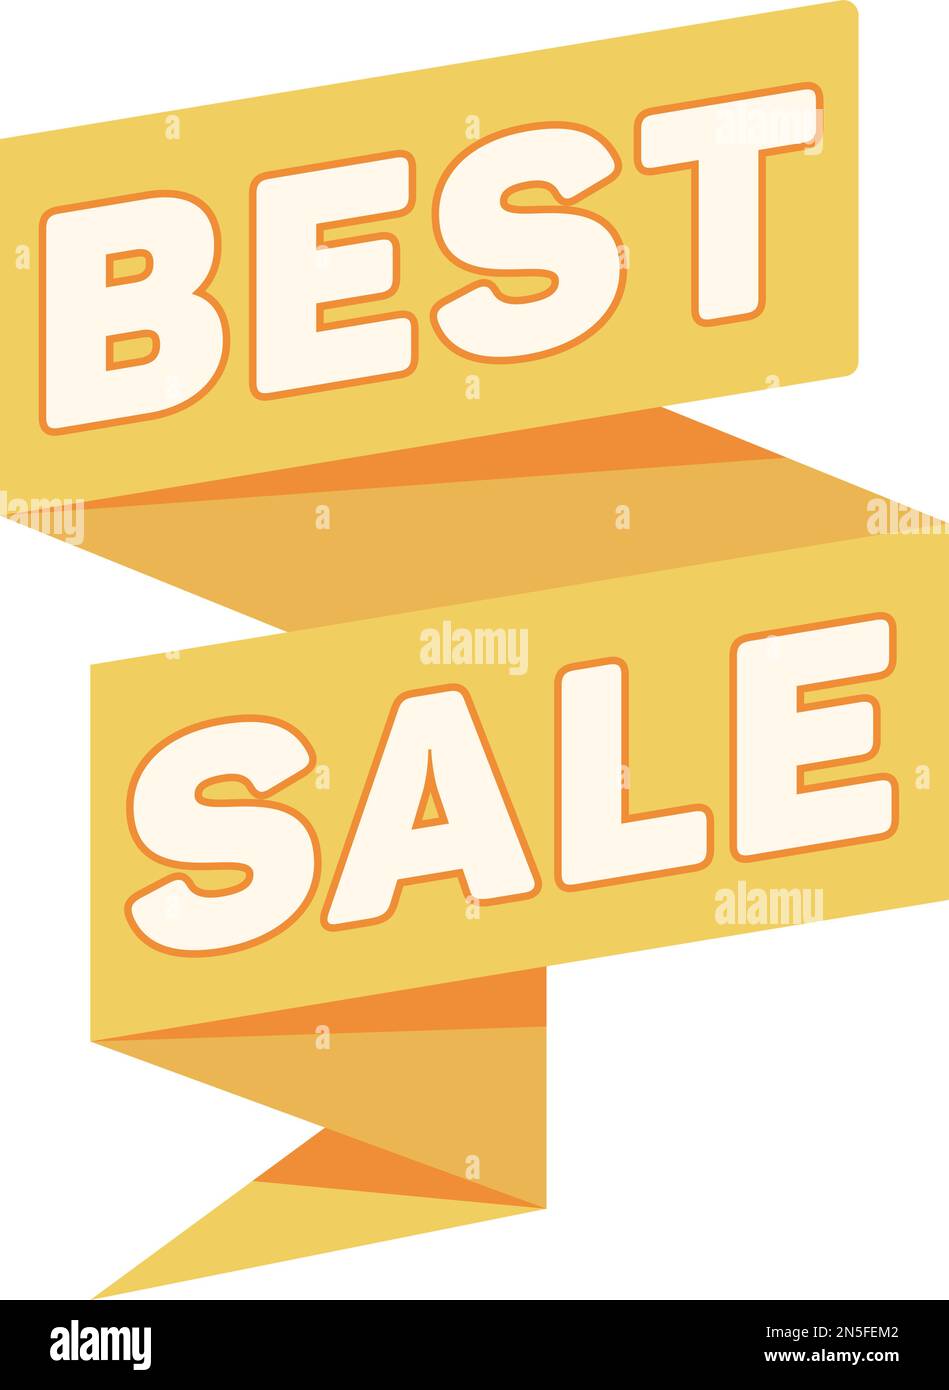 Best sale origami banner. Discount promo tag Stock Vector